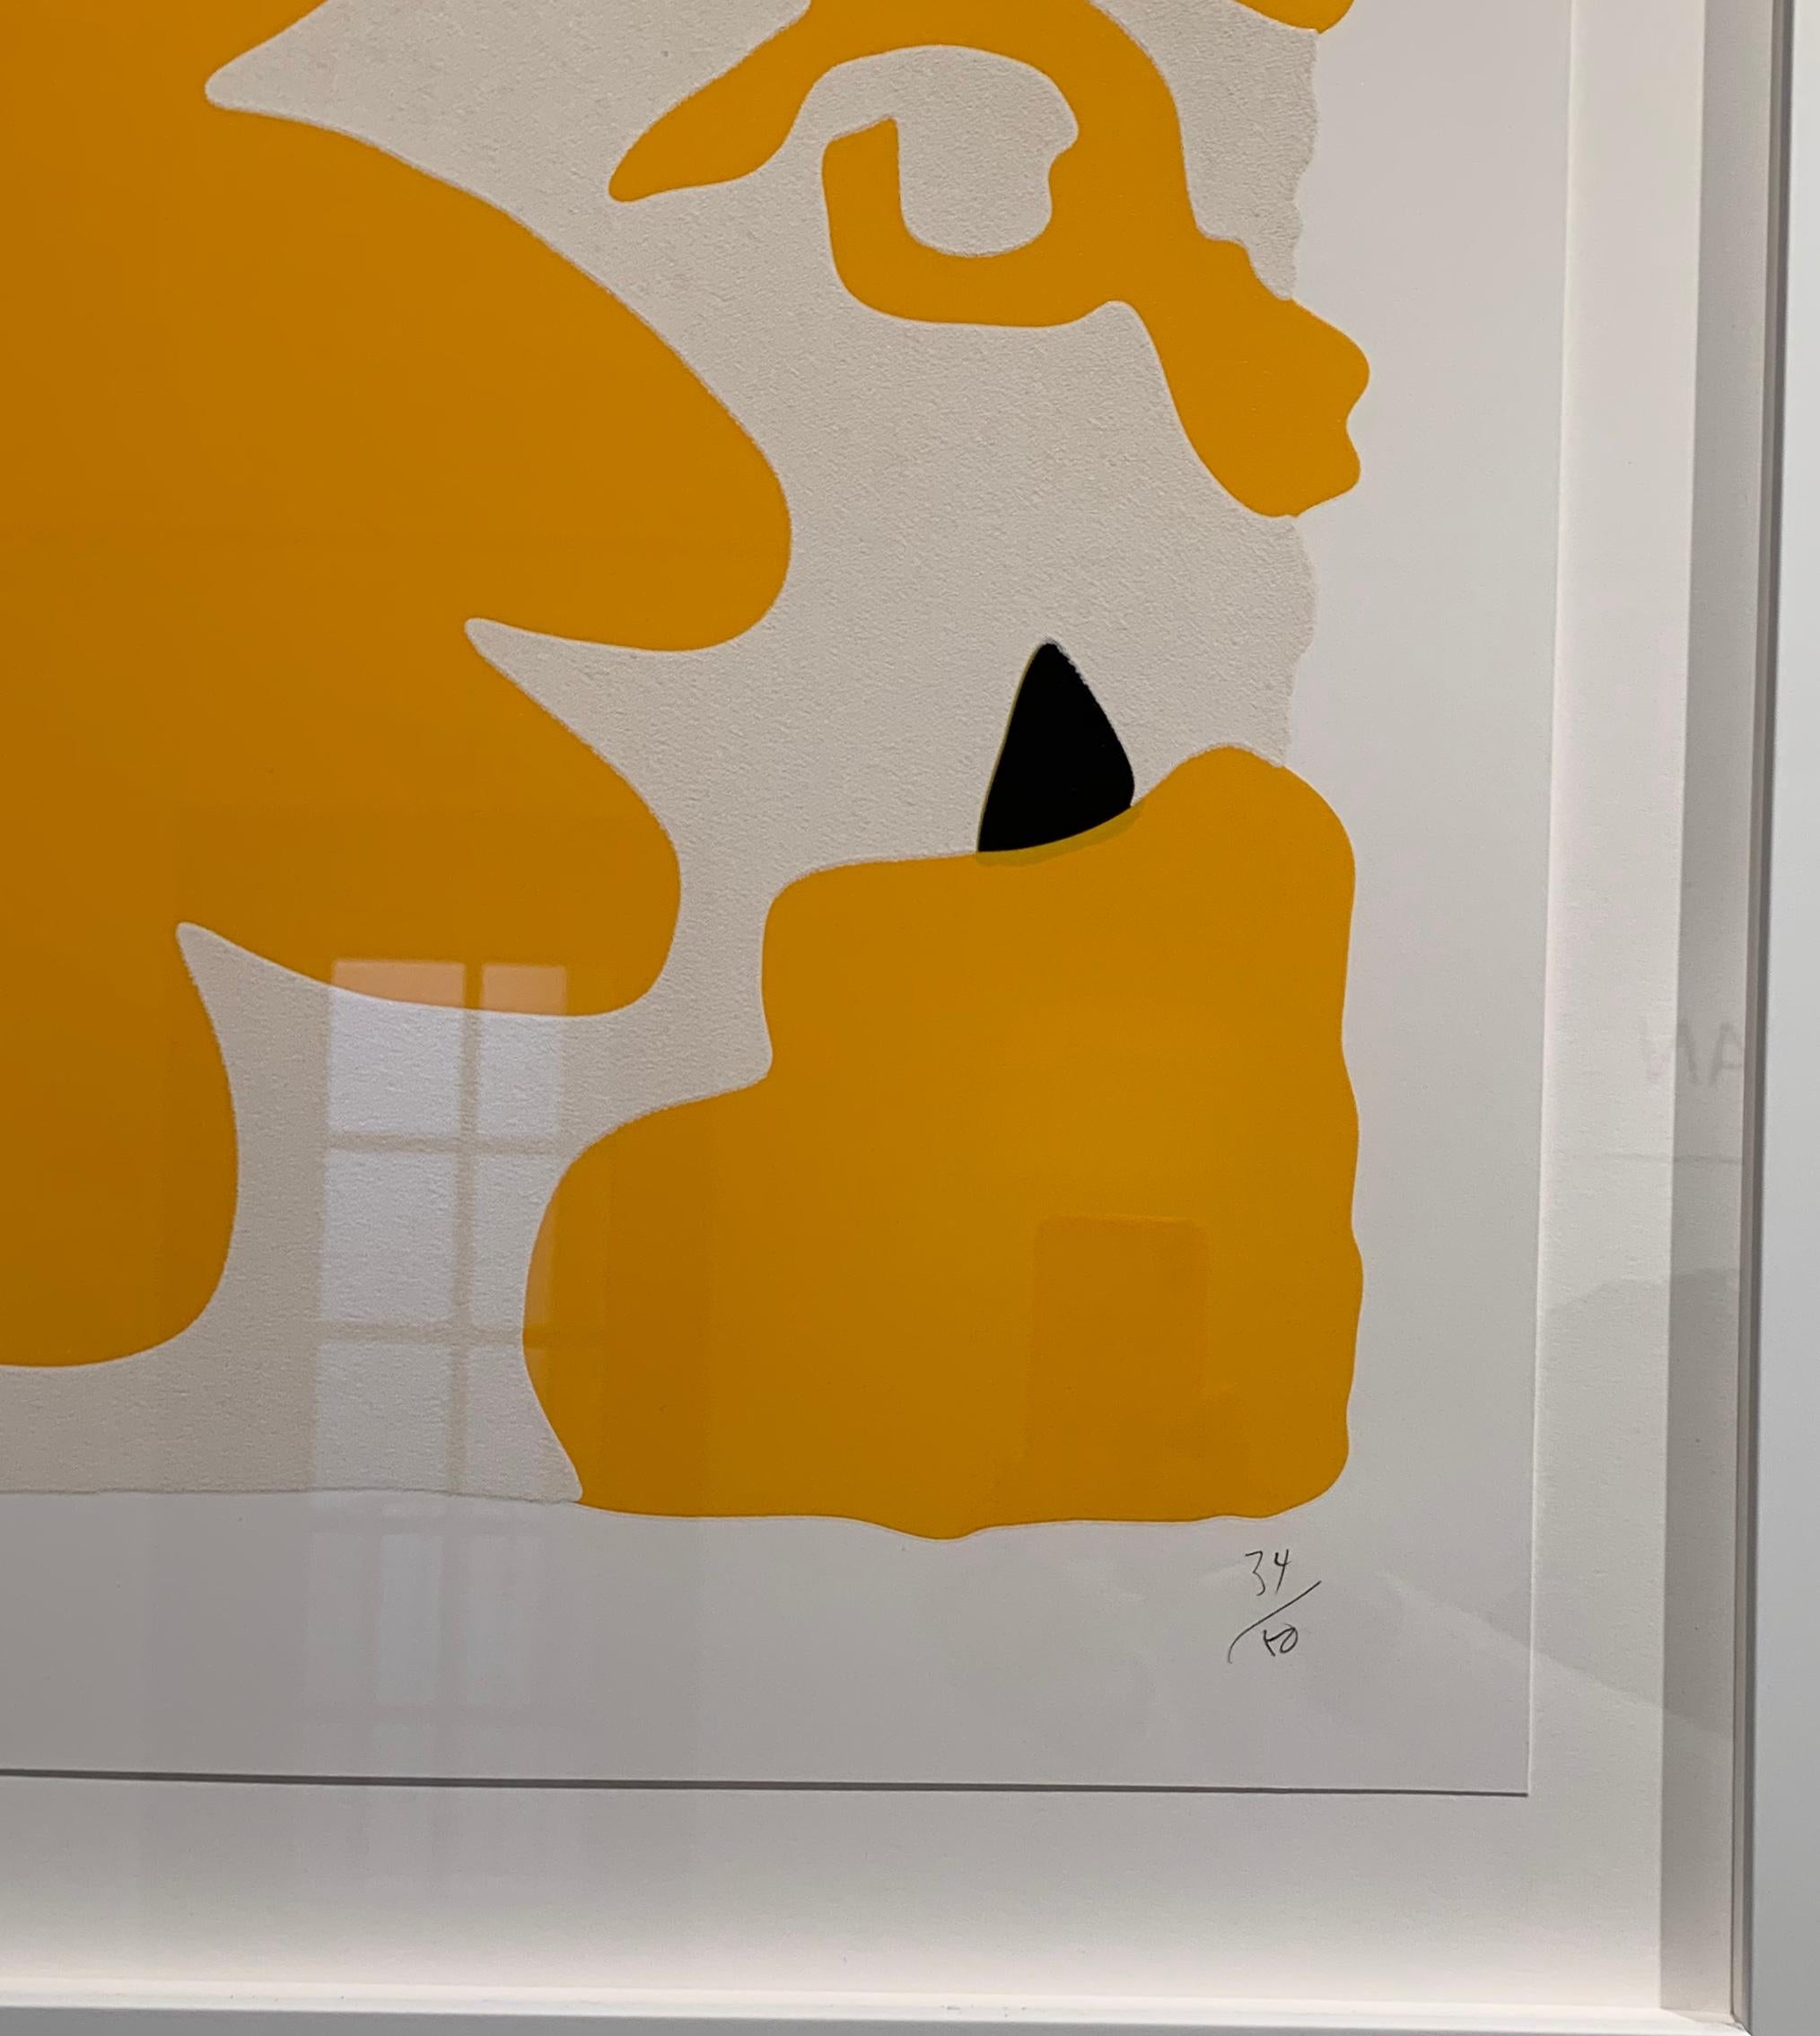 Donald Sultan (Born 1951)
Lantern Flowers (Yellow and White), 2017
Color silkscreen with over-printed flocking on Rising, 2-ply museum board
32 x 32 in.
Edition 34 of 50
Signed by artist
Framed in white gallery frame and glass